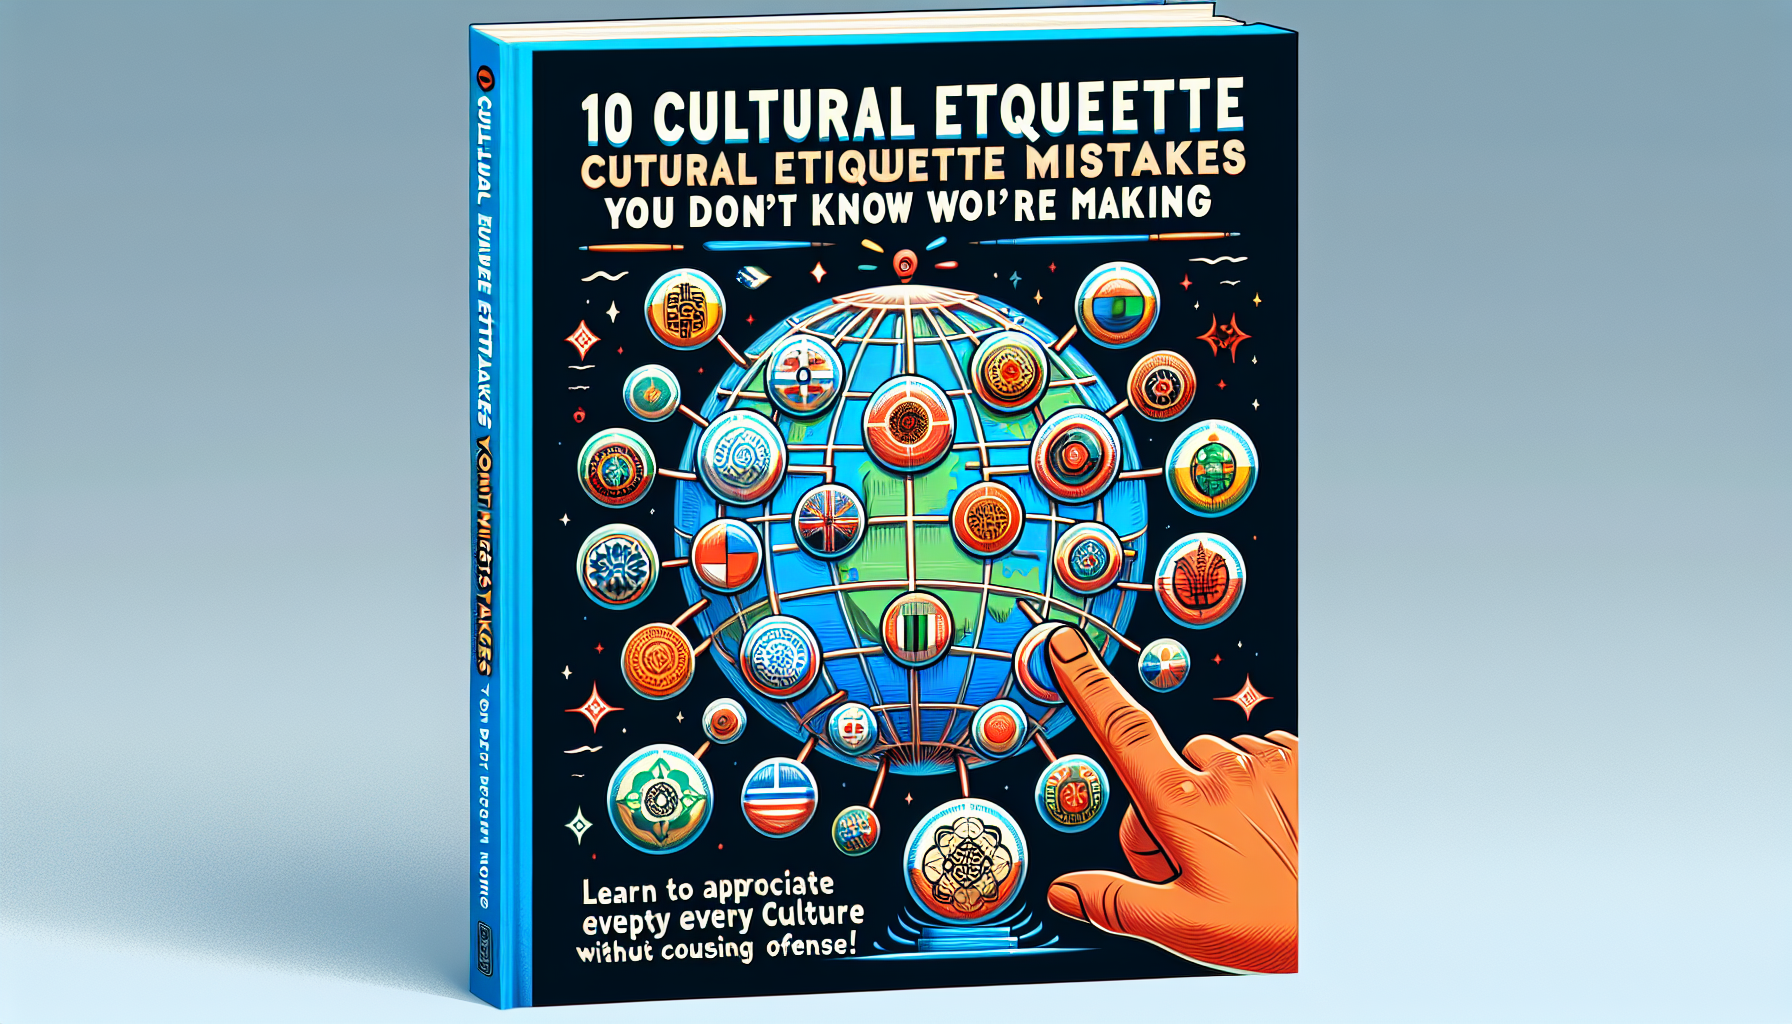 avoid cultural etiquette mistakes and offending local traditions with these tips and insights. learn how to navigate different cultures with grace and respect.